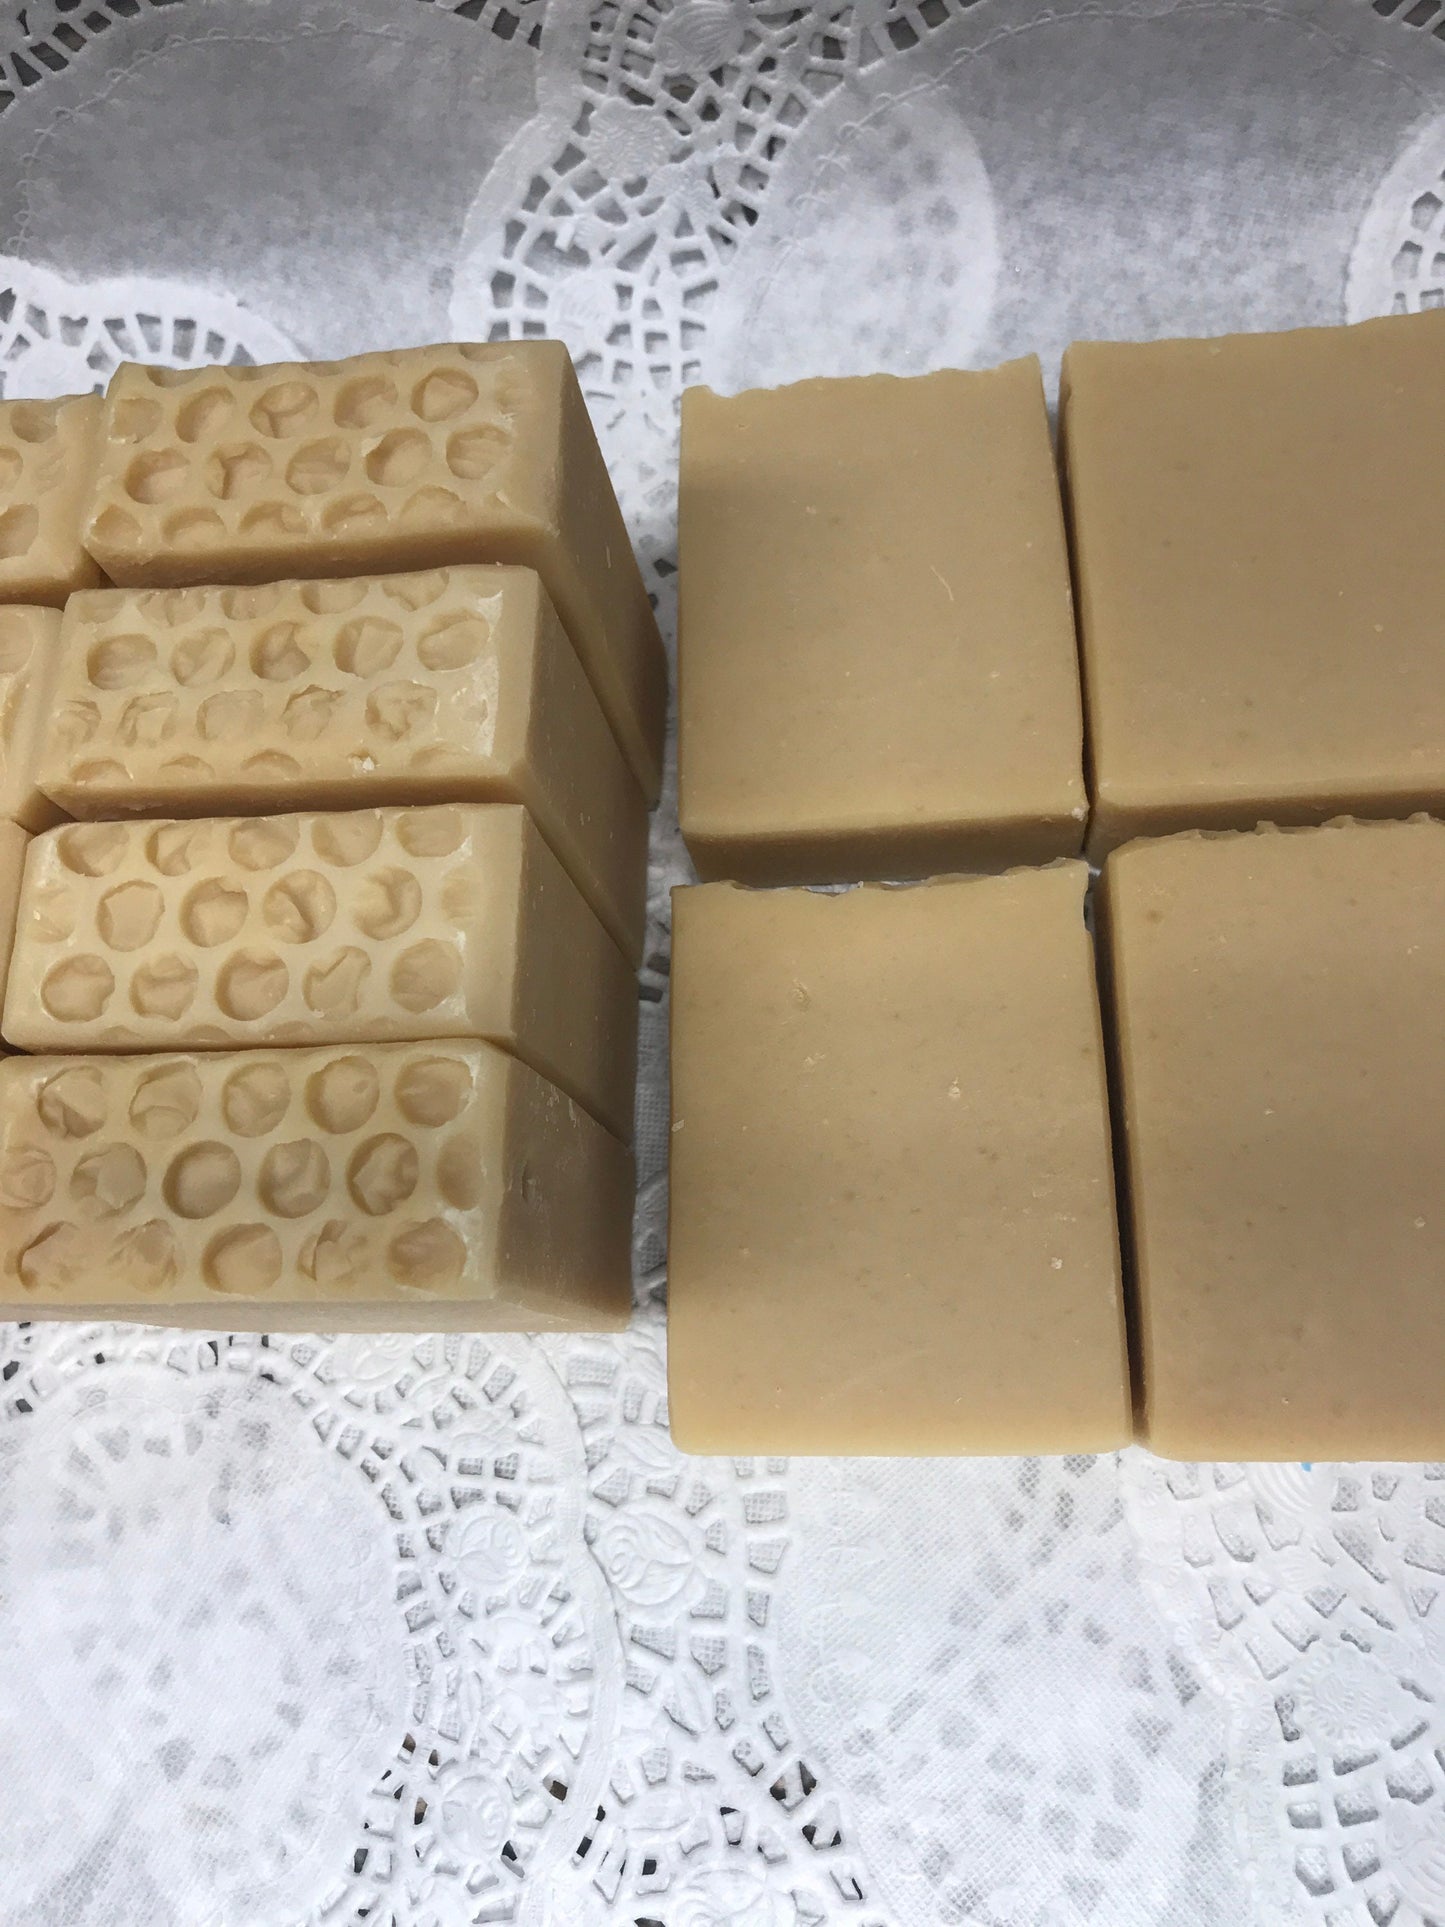 A photo of Goat's Milk and Honey Soap showing a honey comb pattern